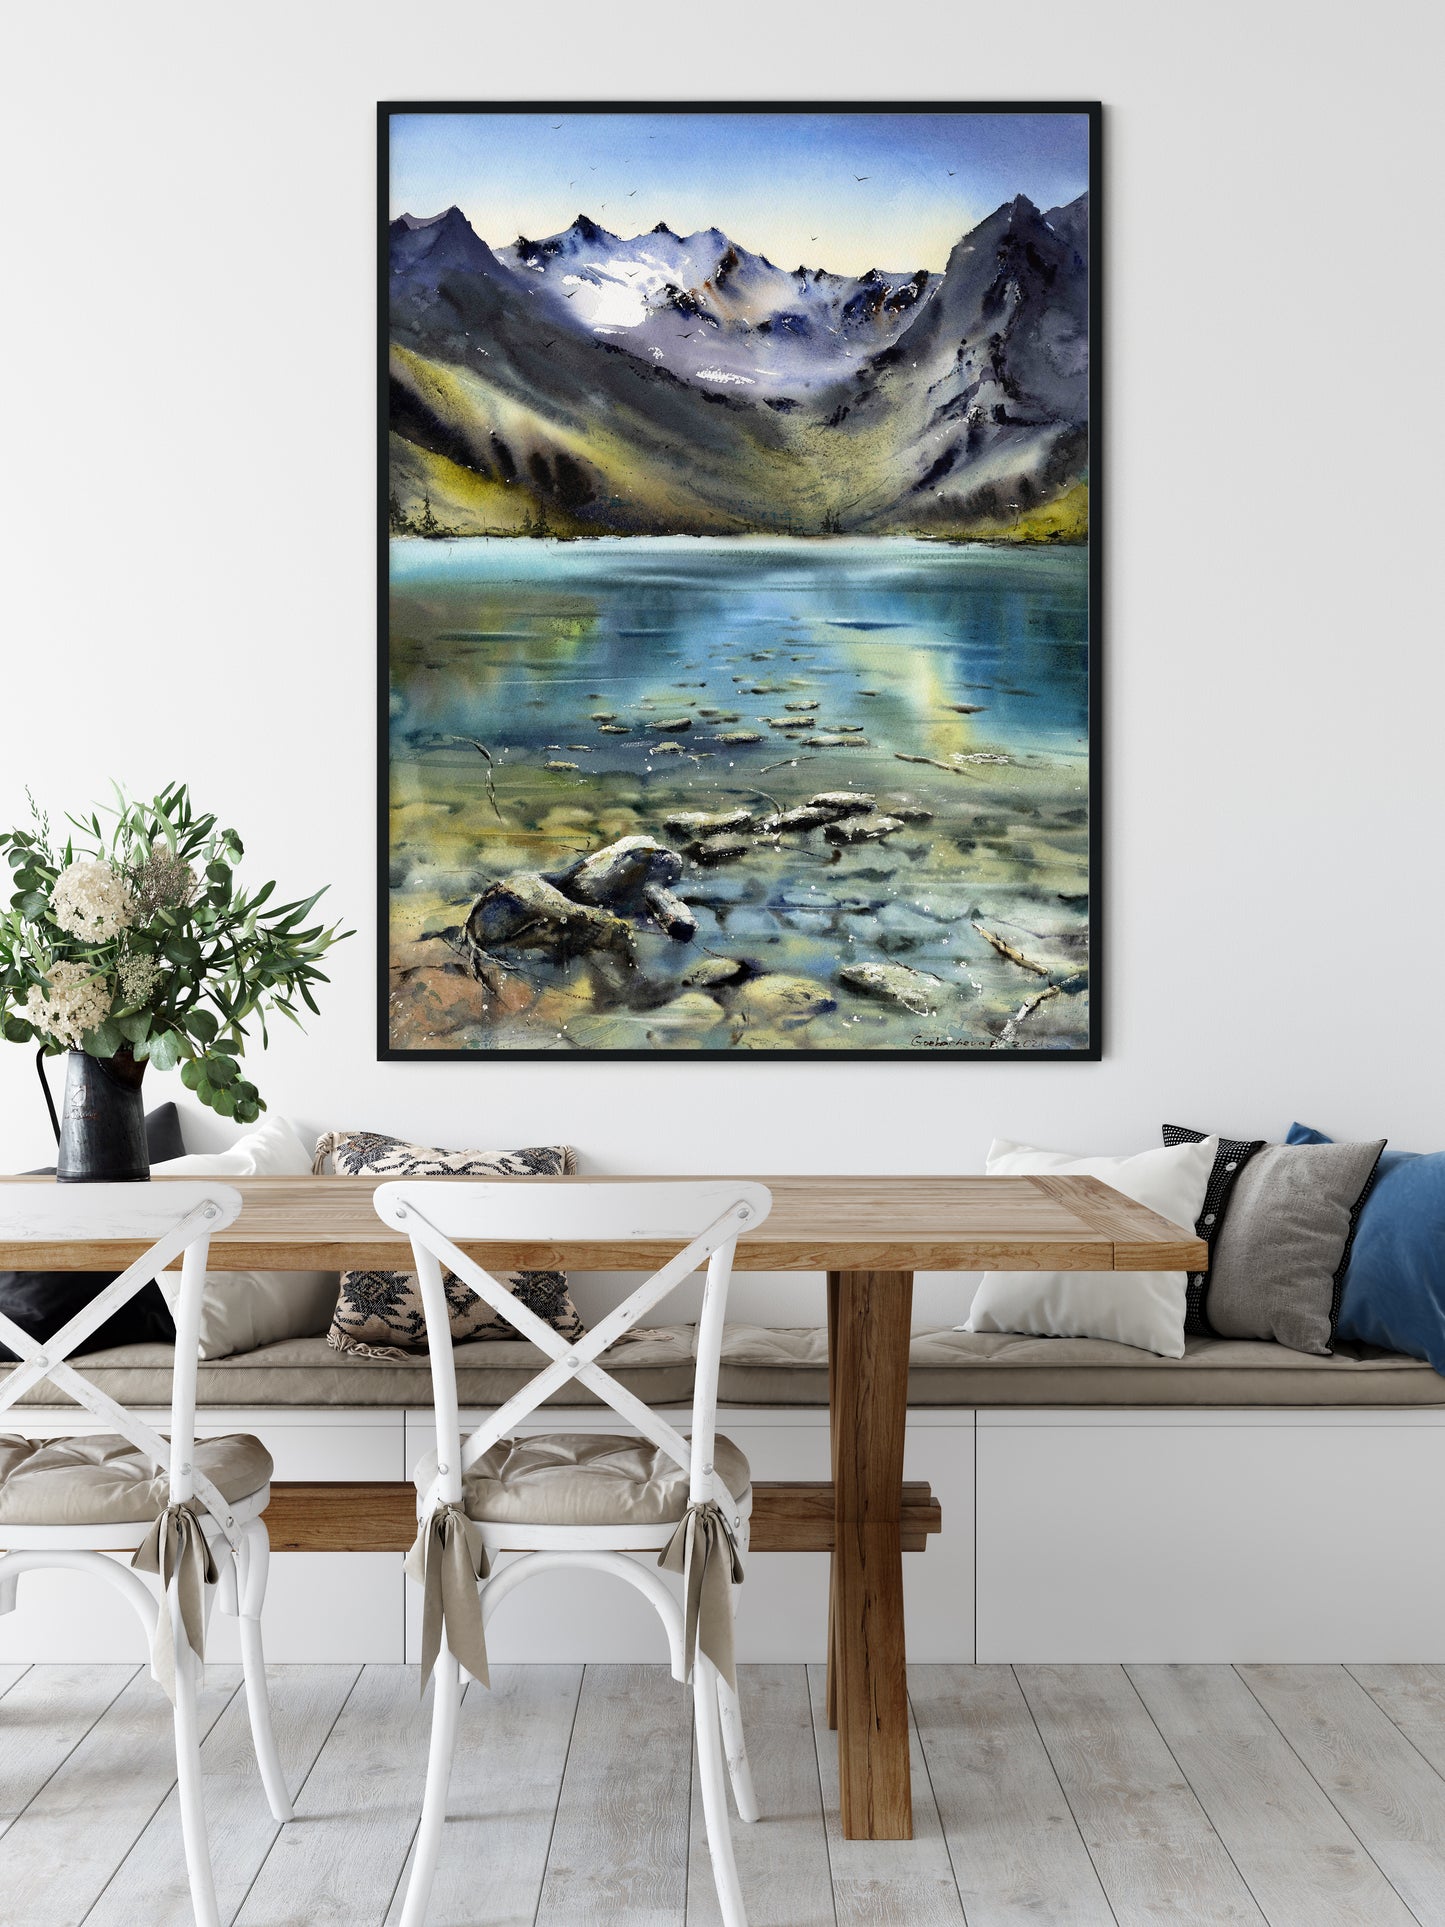 Mountain Lake Wall Art, Nature Art Decor, Clear Blue Water, Landscape Large Print, Modern Home & Office Wall Decoration